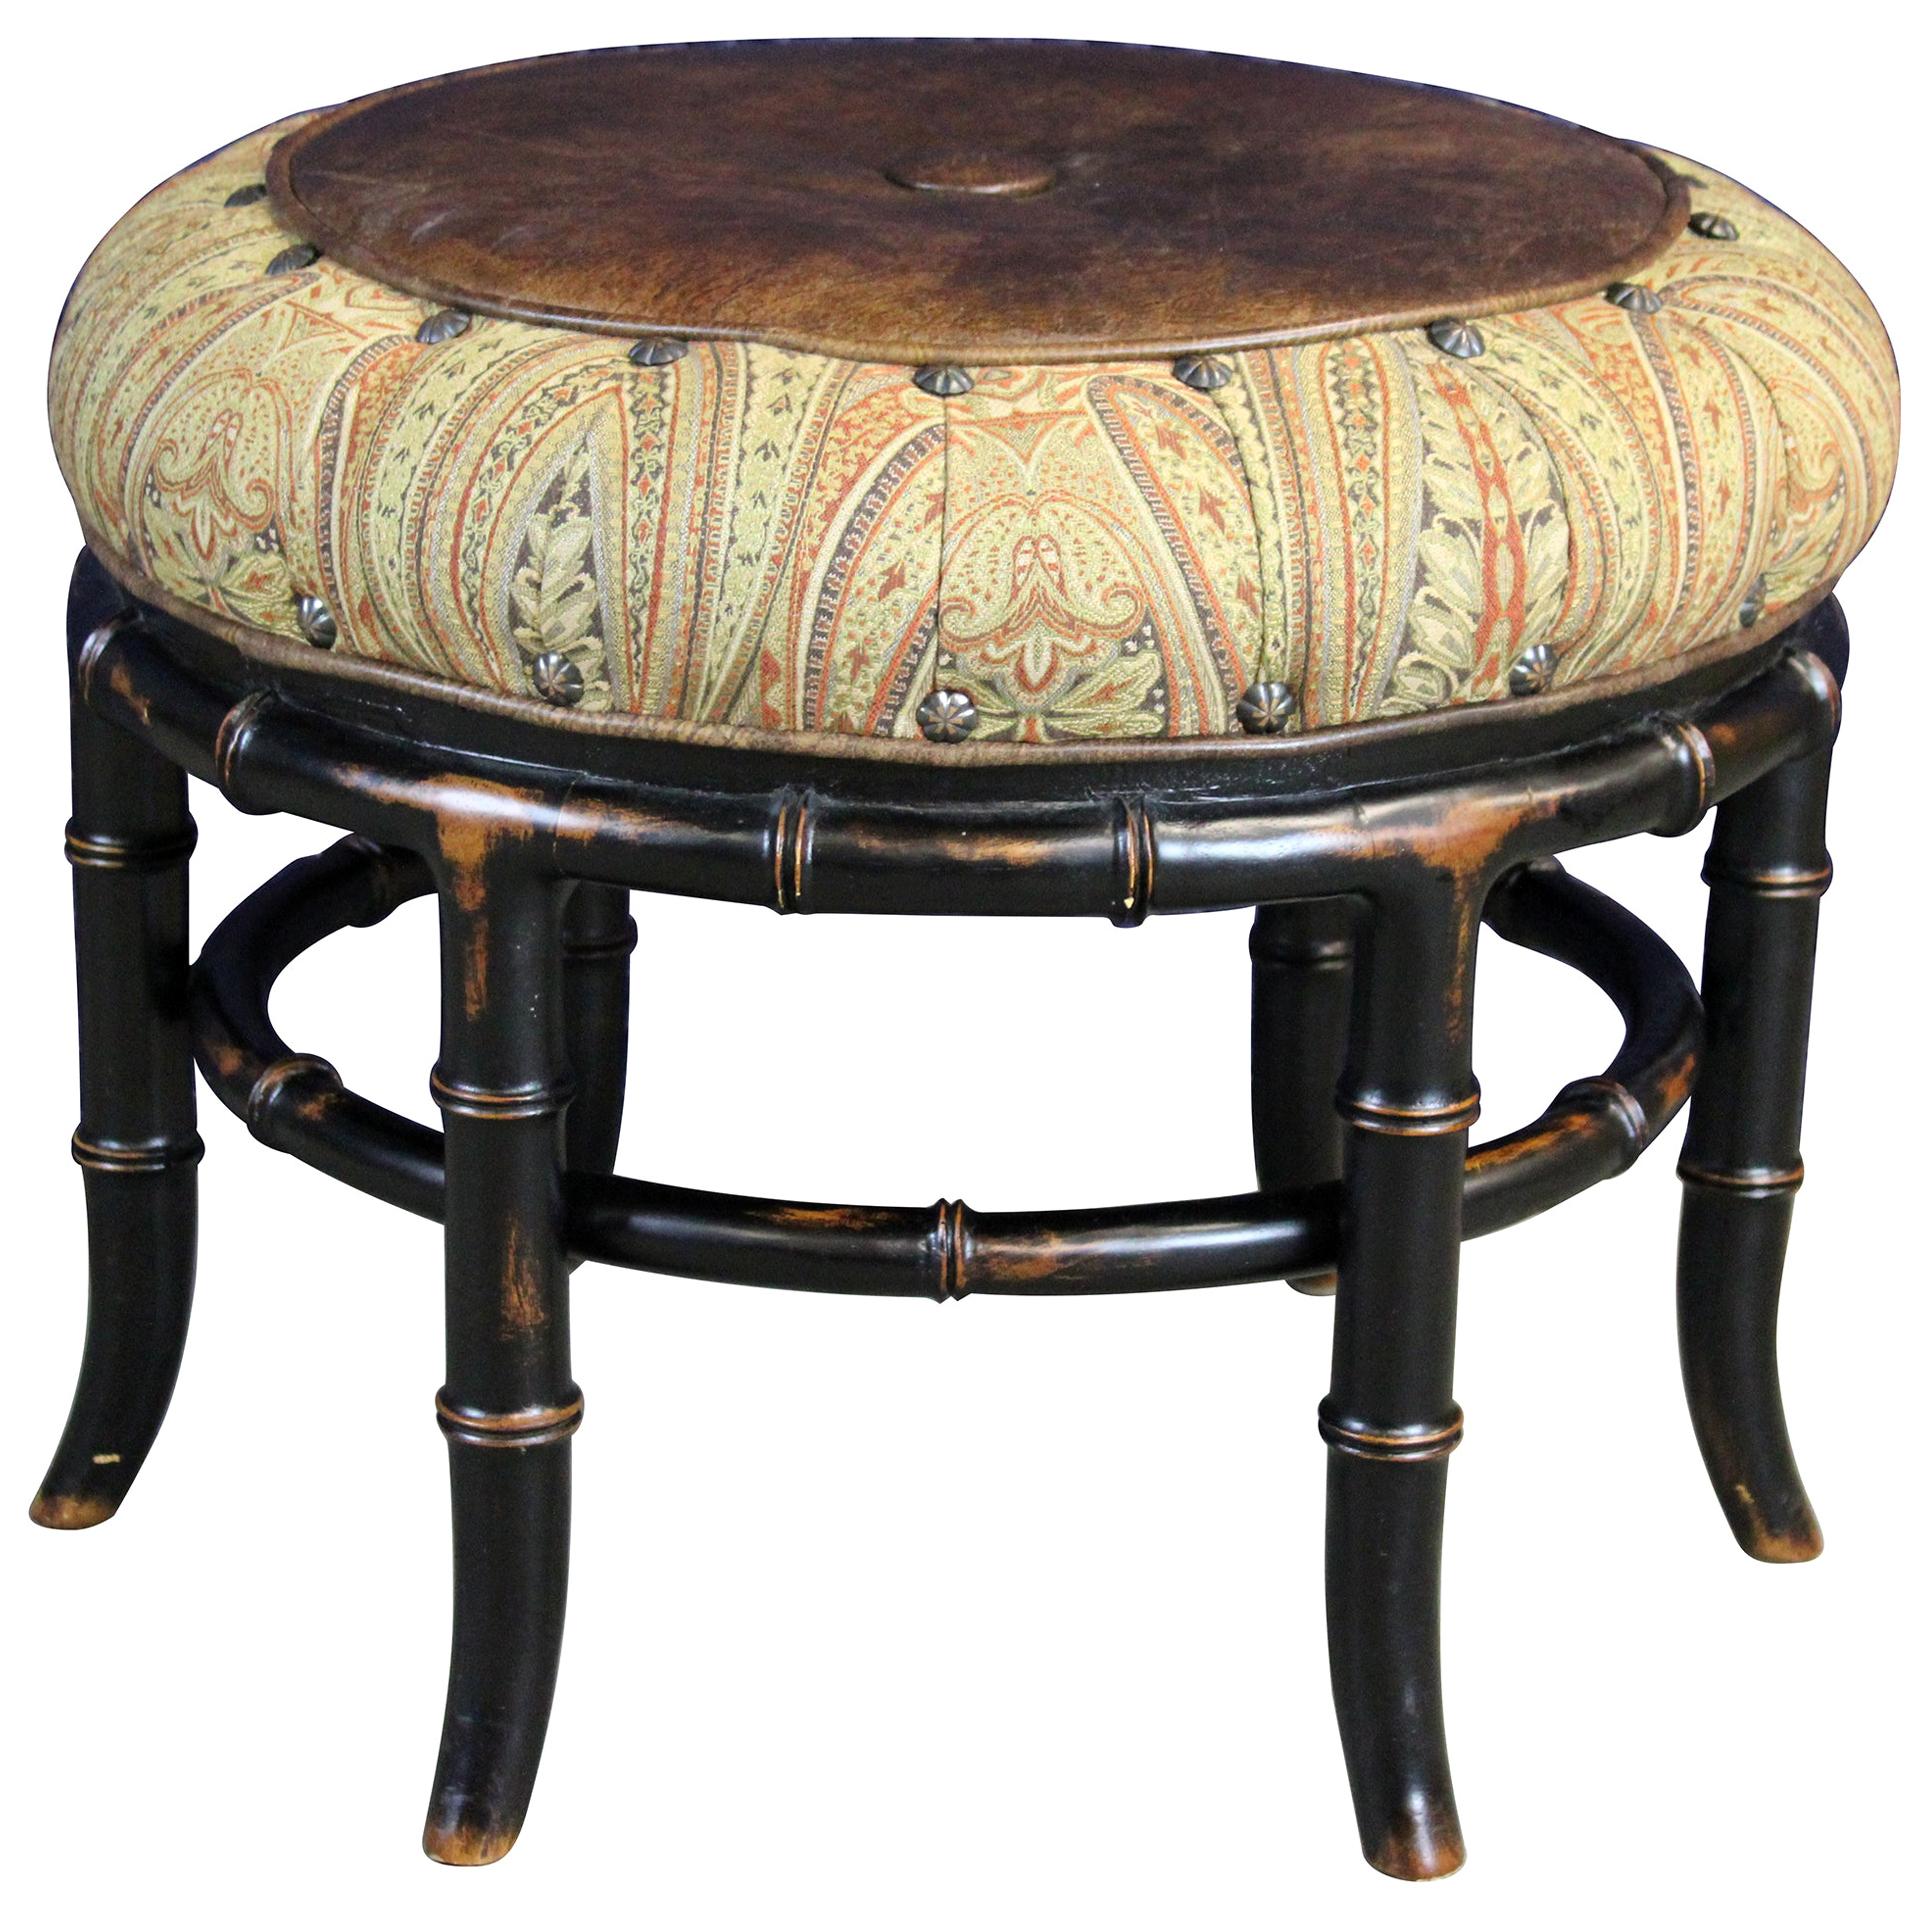 Vanguard Furniture Round Leather and Paisley Faux Bamboo Ottoman Bench Pouf